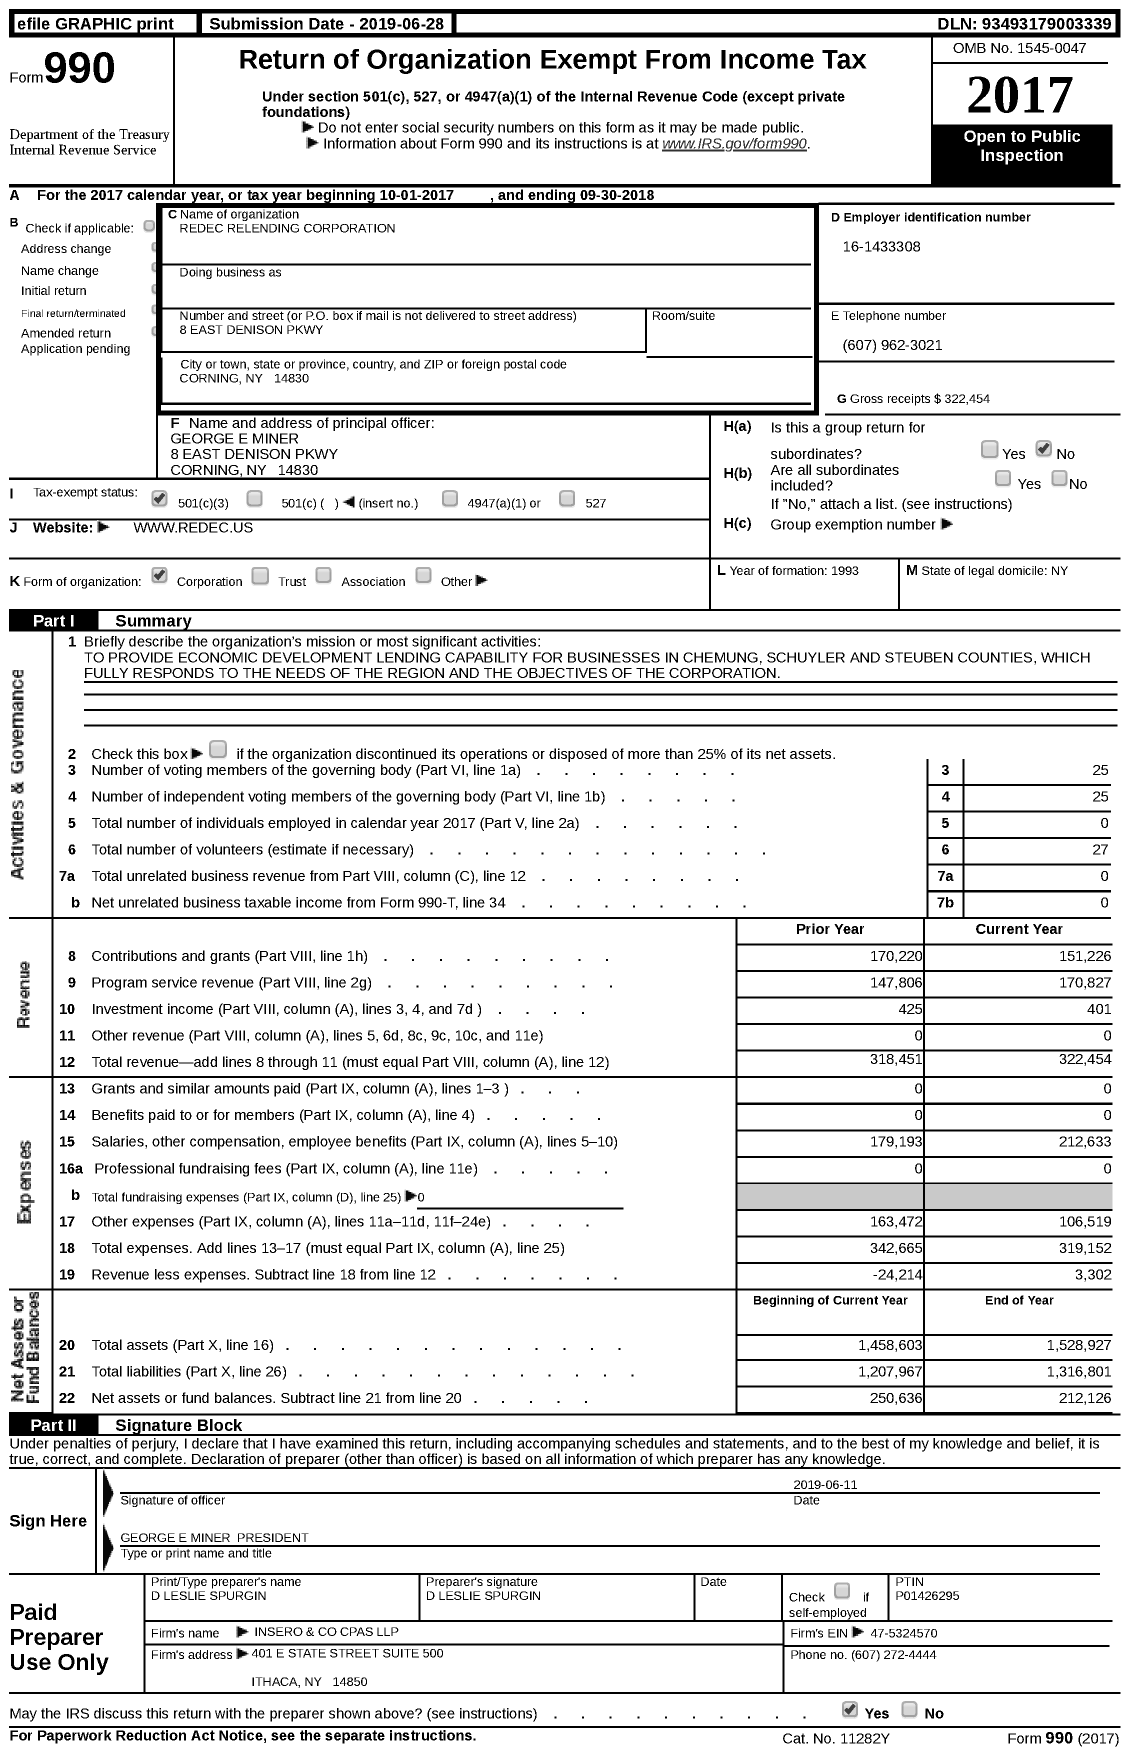 Image of first page of 2017 Form 990 for Redec Relending Corporation